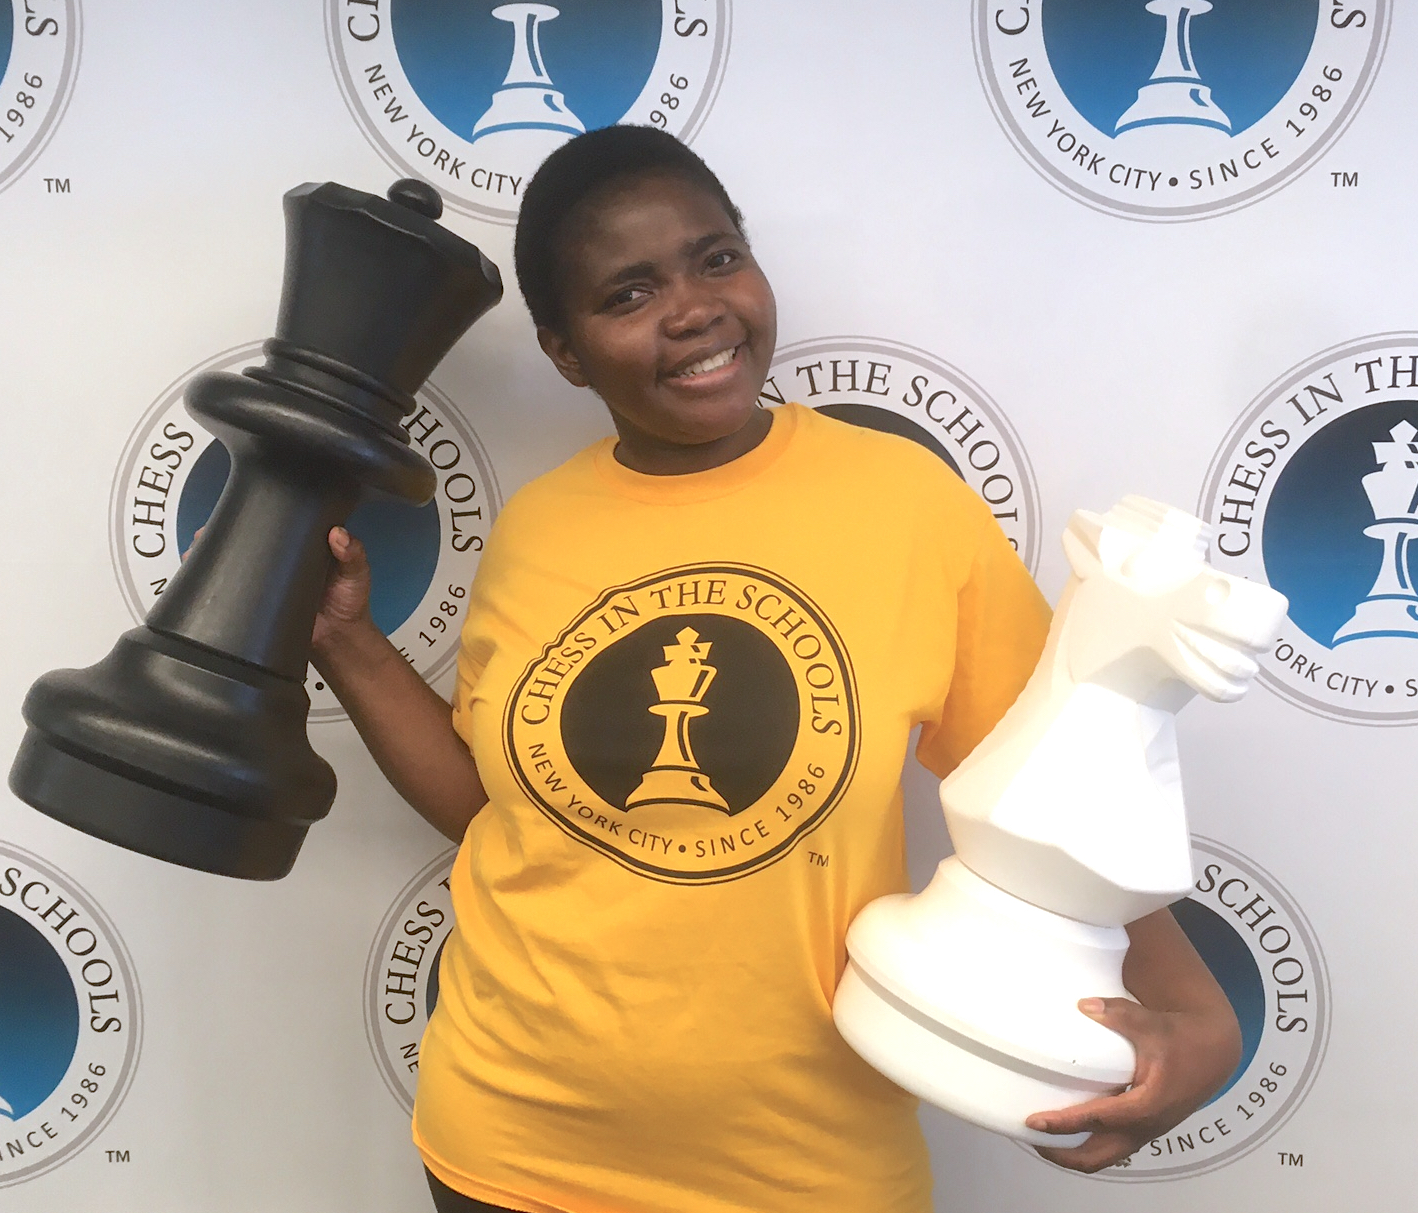 Image for Chess in the Schools is Happy to Welcome Epah Jere, CIS’s New Chess Instructor